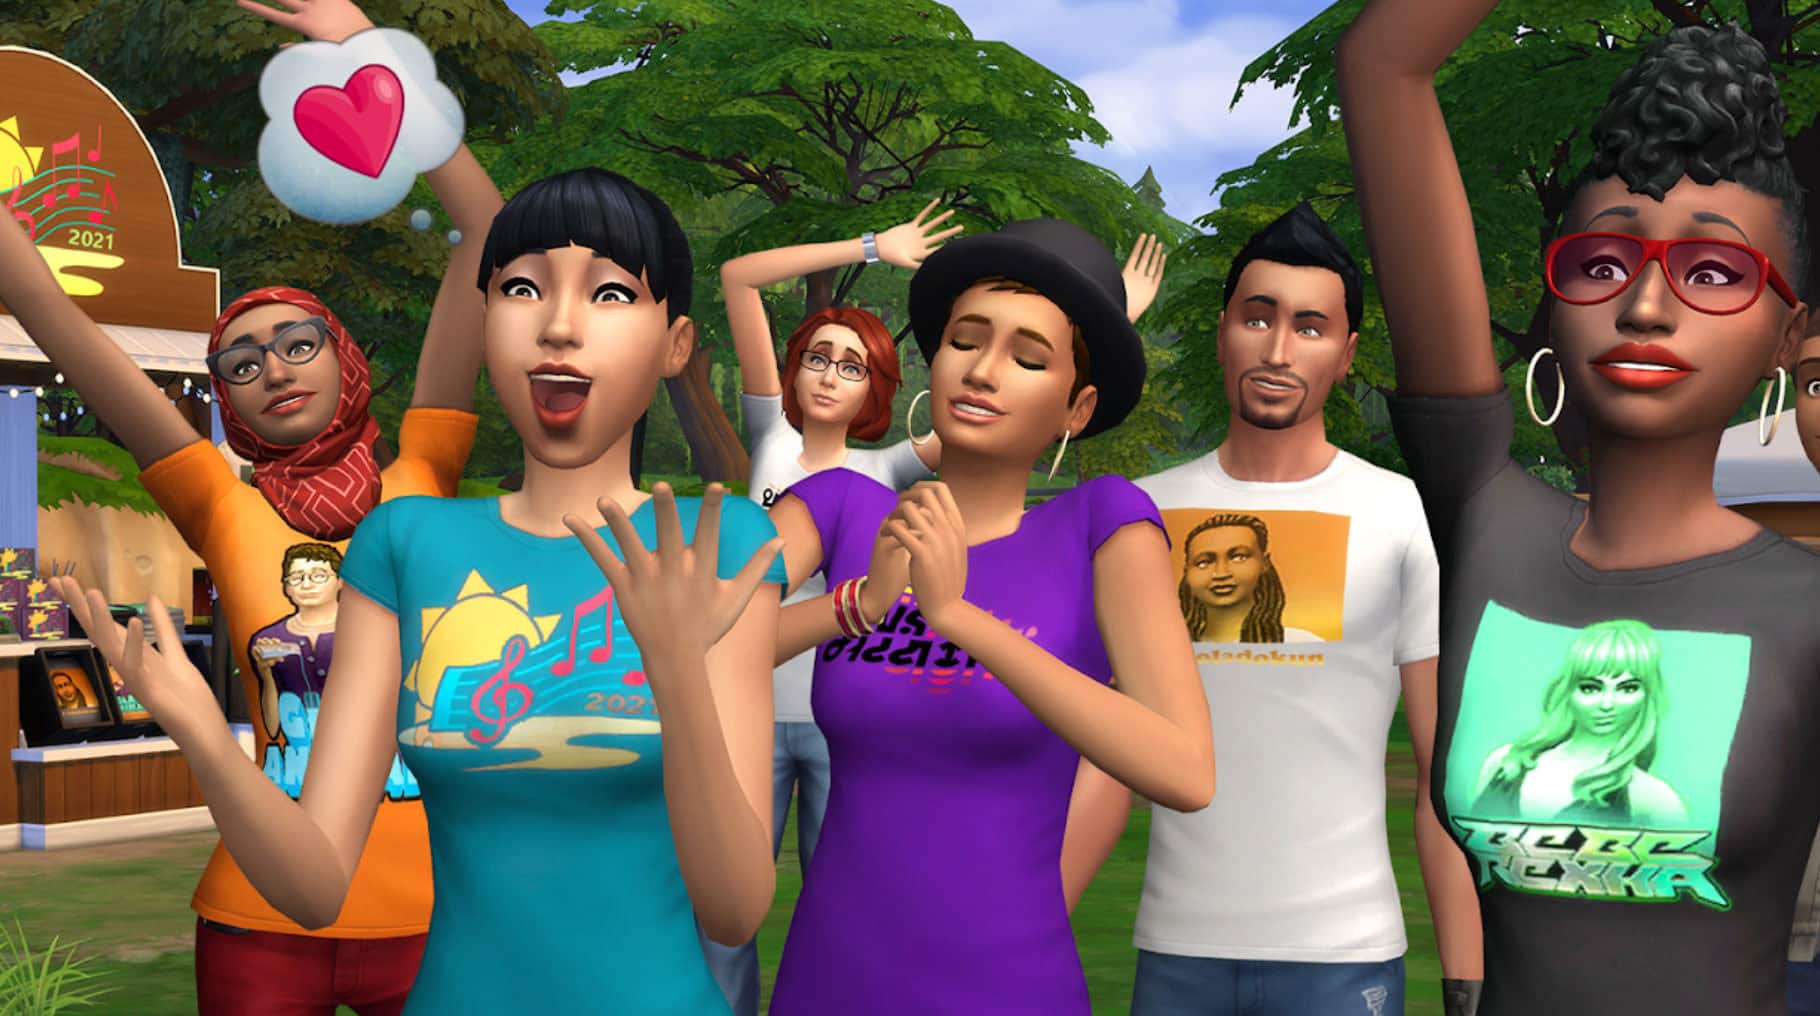 The Sims 4 sims at a concert